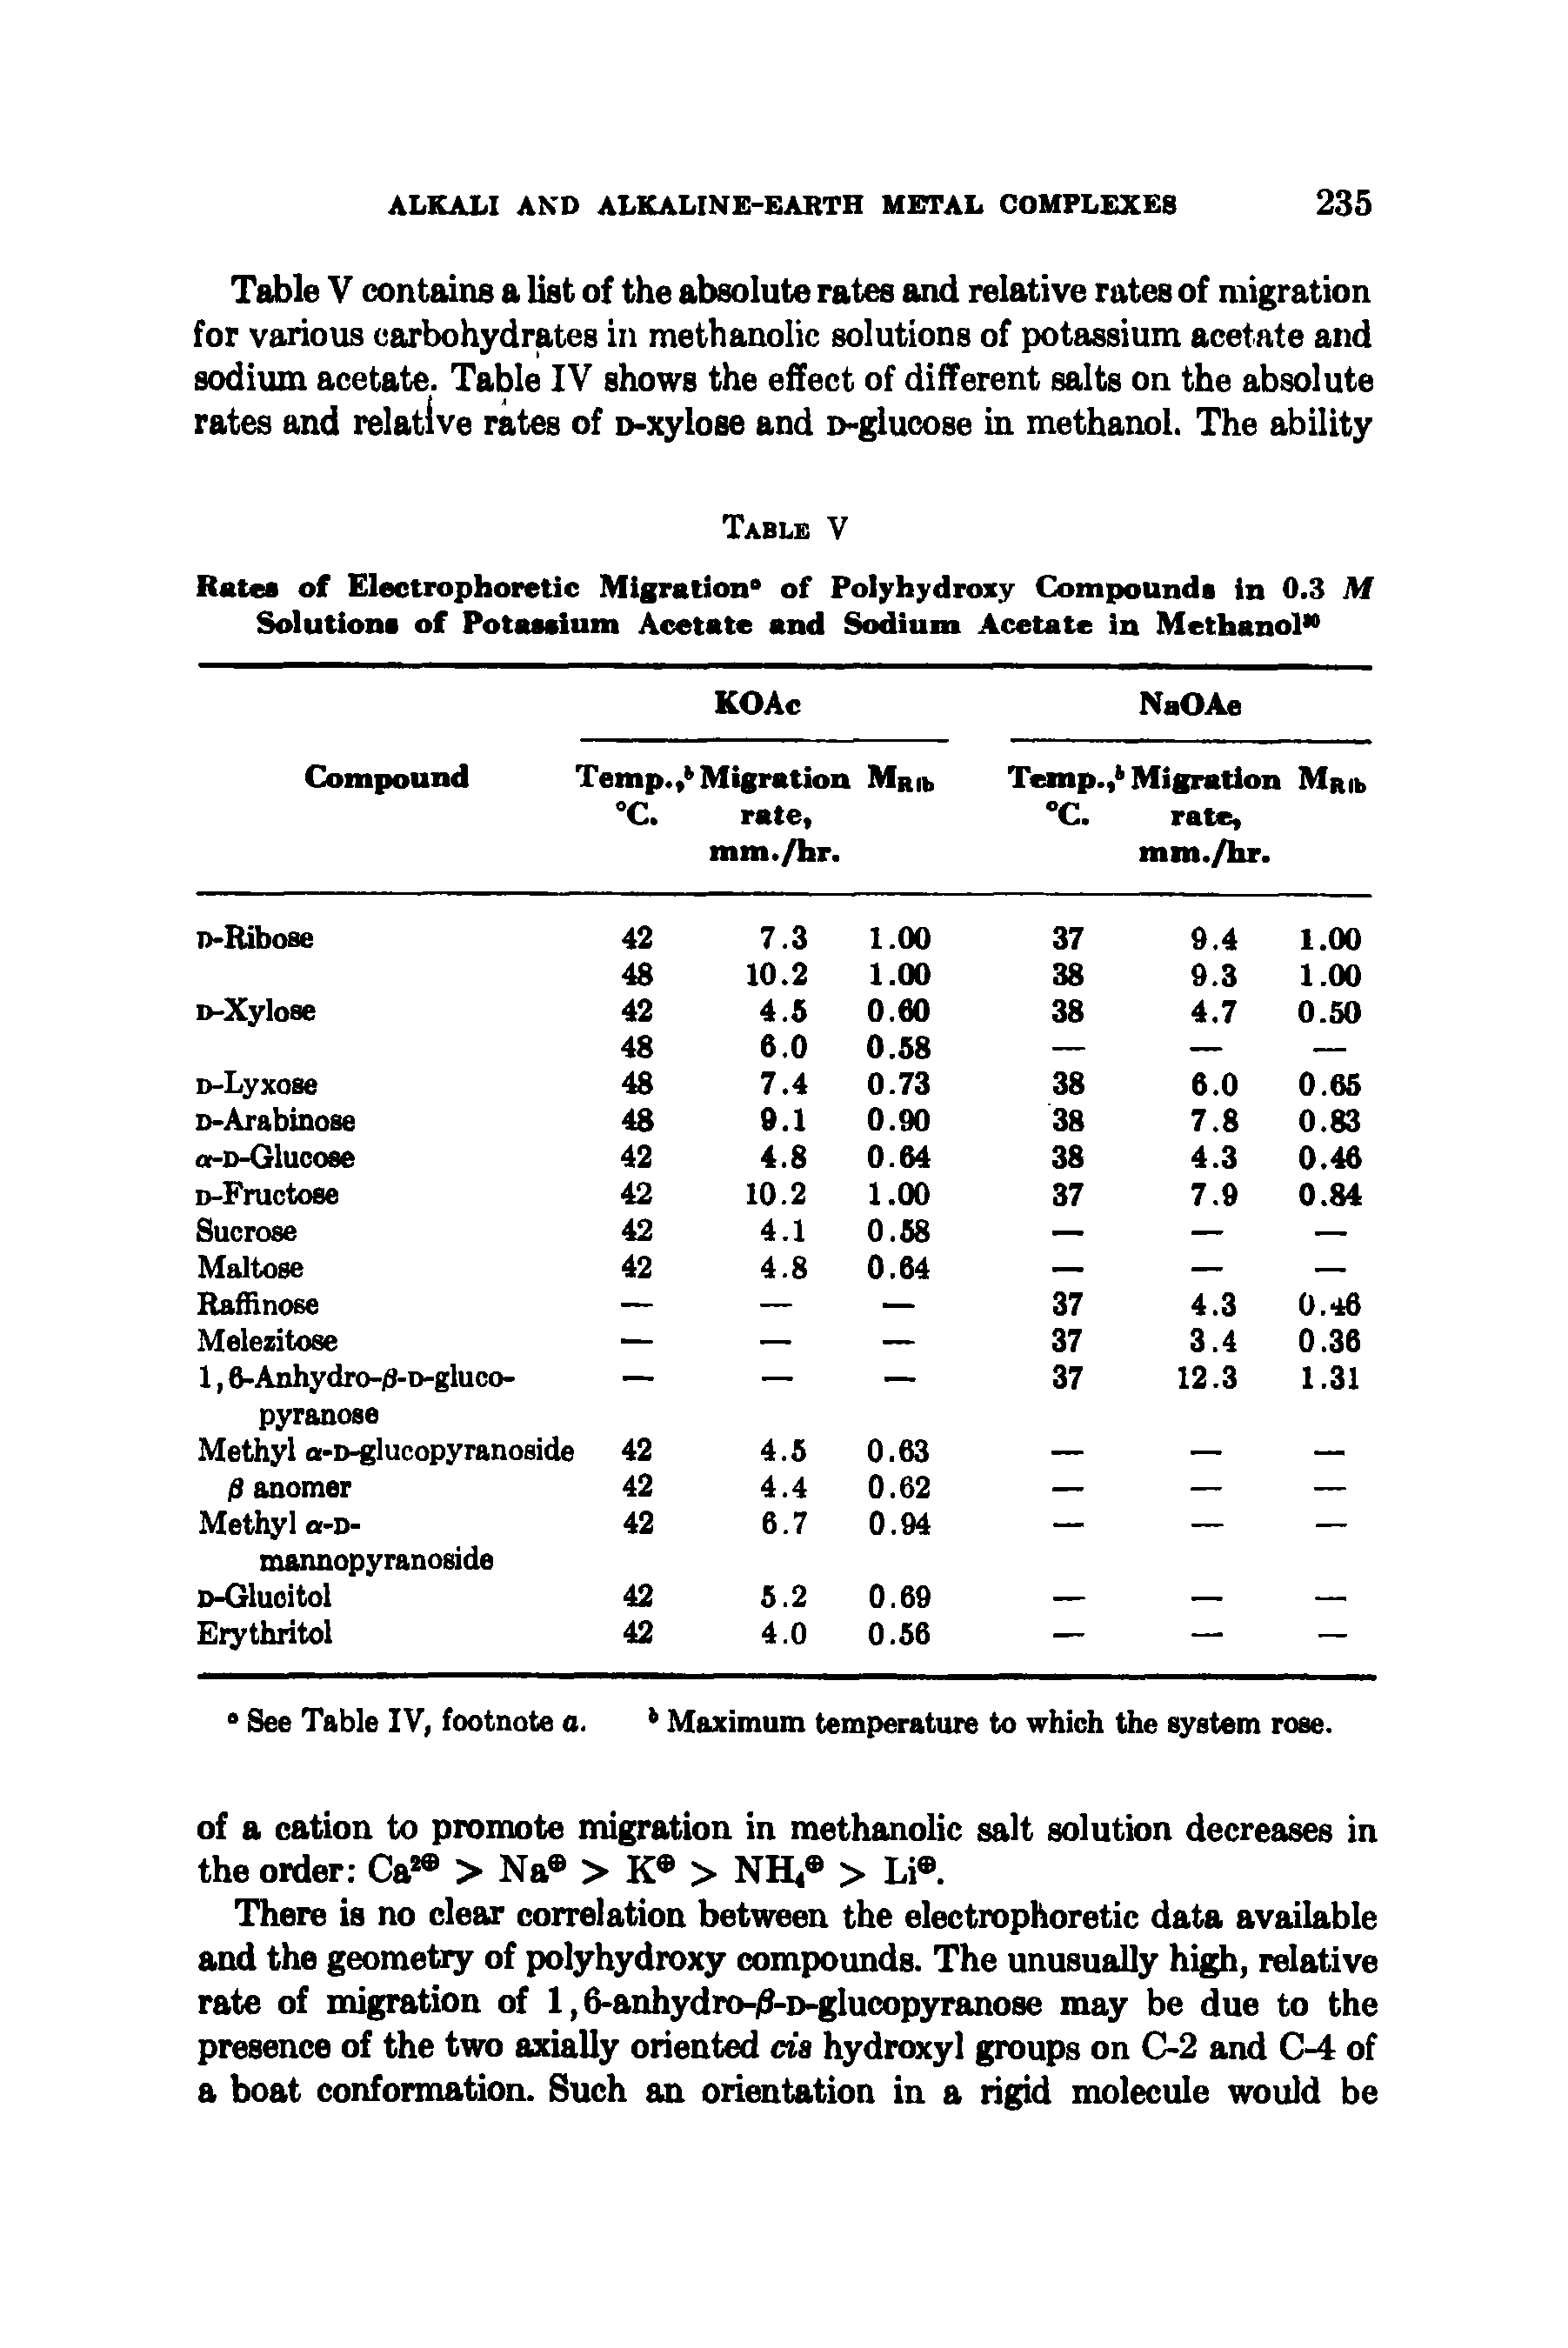 Table V contains a list of the absolute rates and relative rates of migration for various carbohydrates in methanolic solutions of potassium acetate and sodium acetate. Table IV shows the effect of different salts on the absolute rates and relative rates of D-xylose and D-glucose in methanol. The ability...